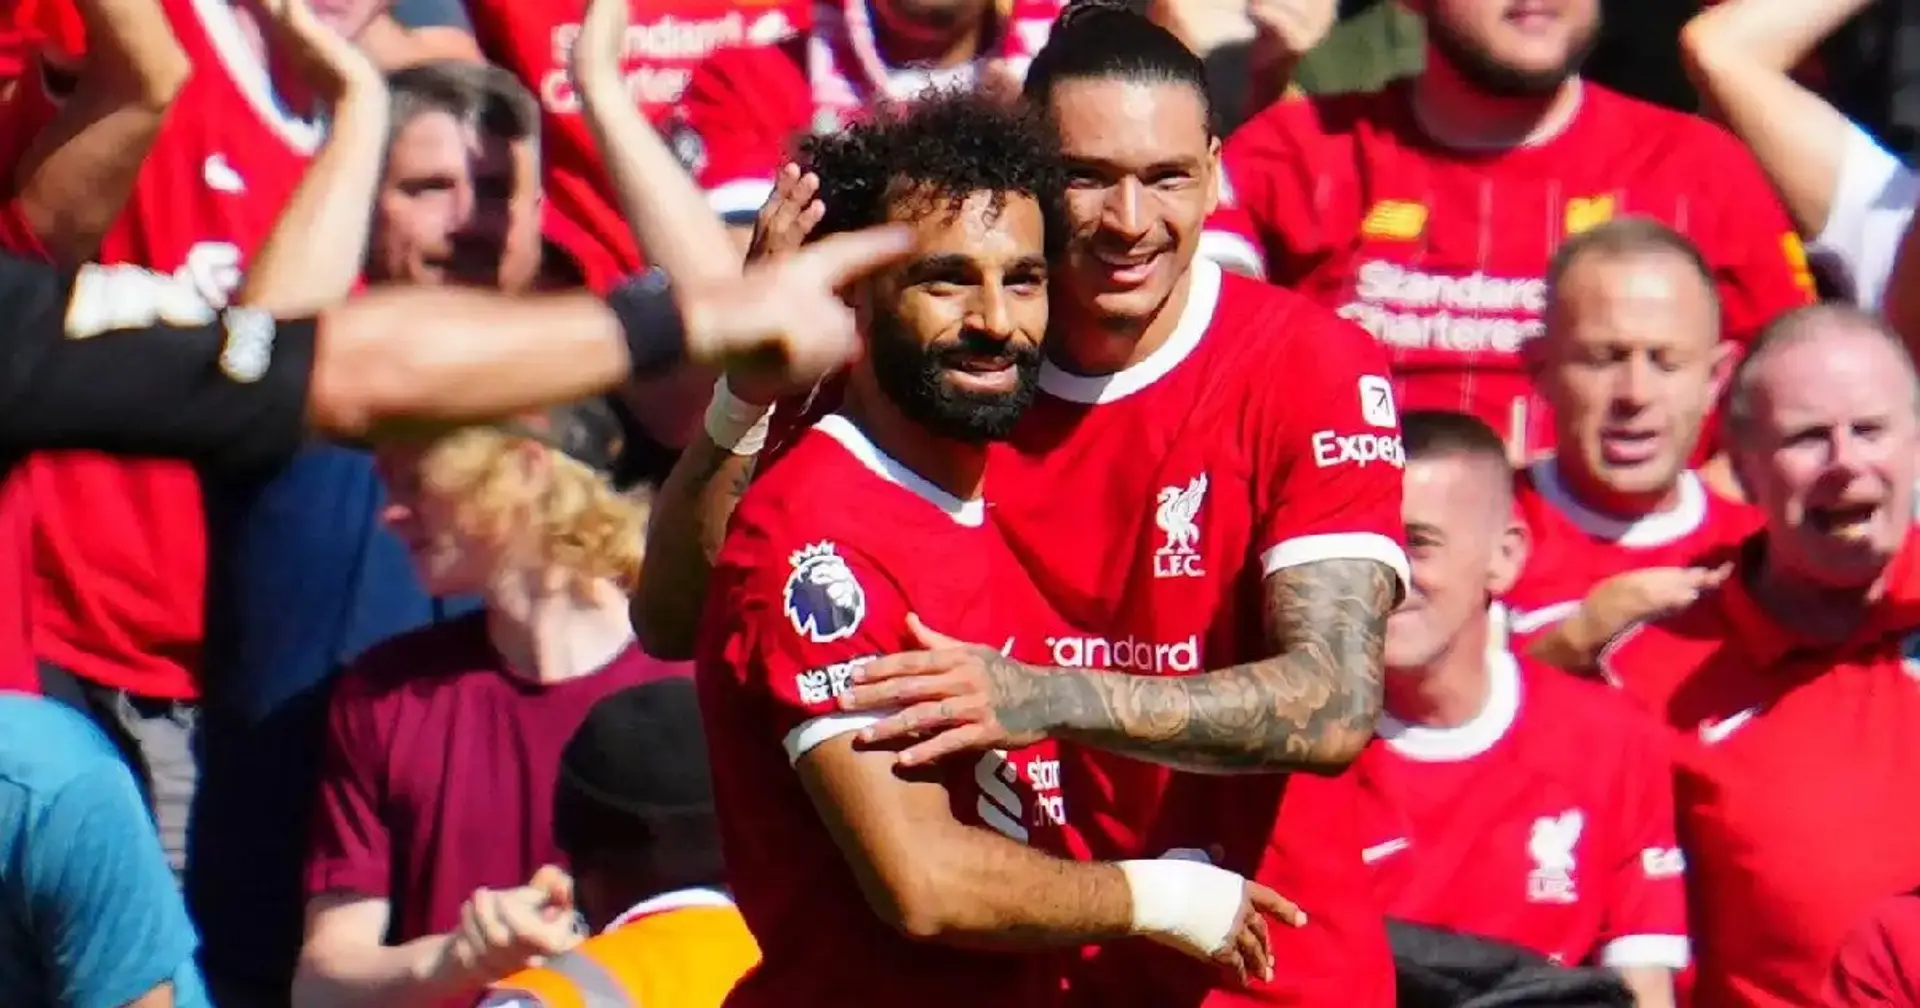 Salah, Nunez and Szoboszlai not spotted with Liverpool group pitchside at Wembley: Sky Sports